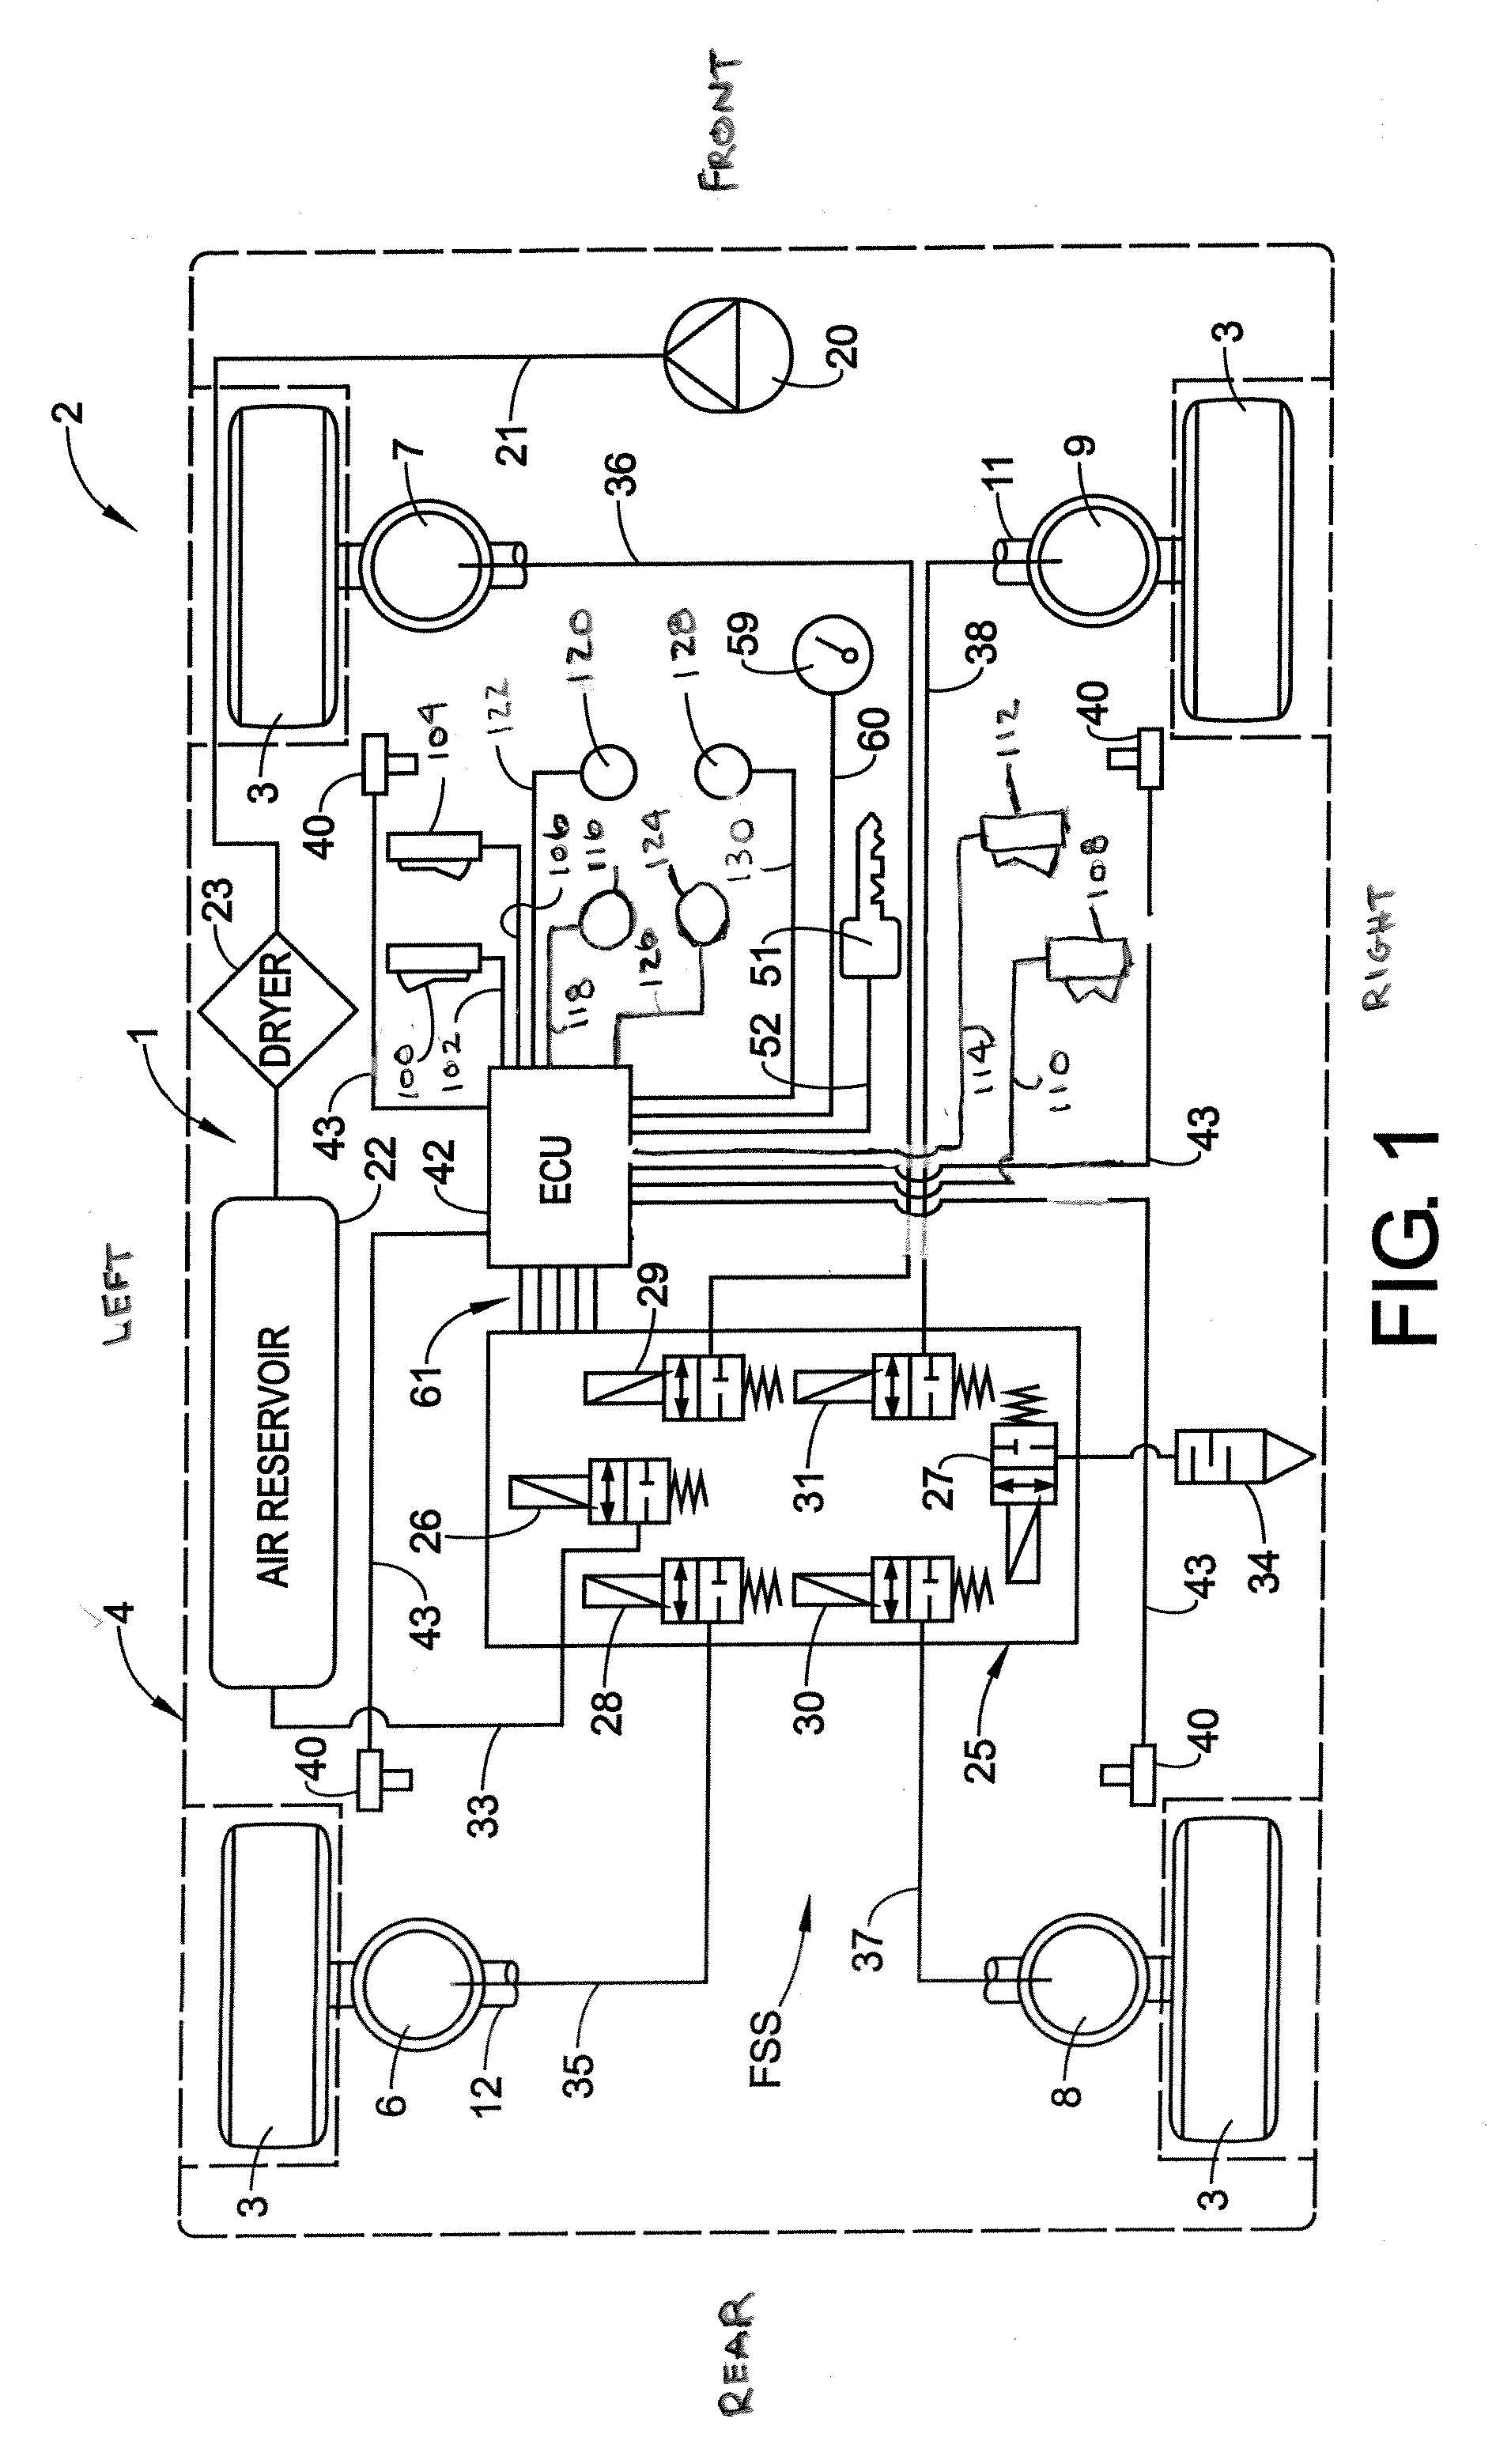 Vehicle chassis height adjustment method and system